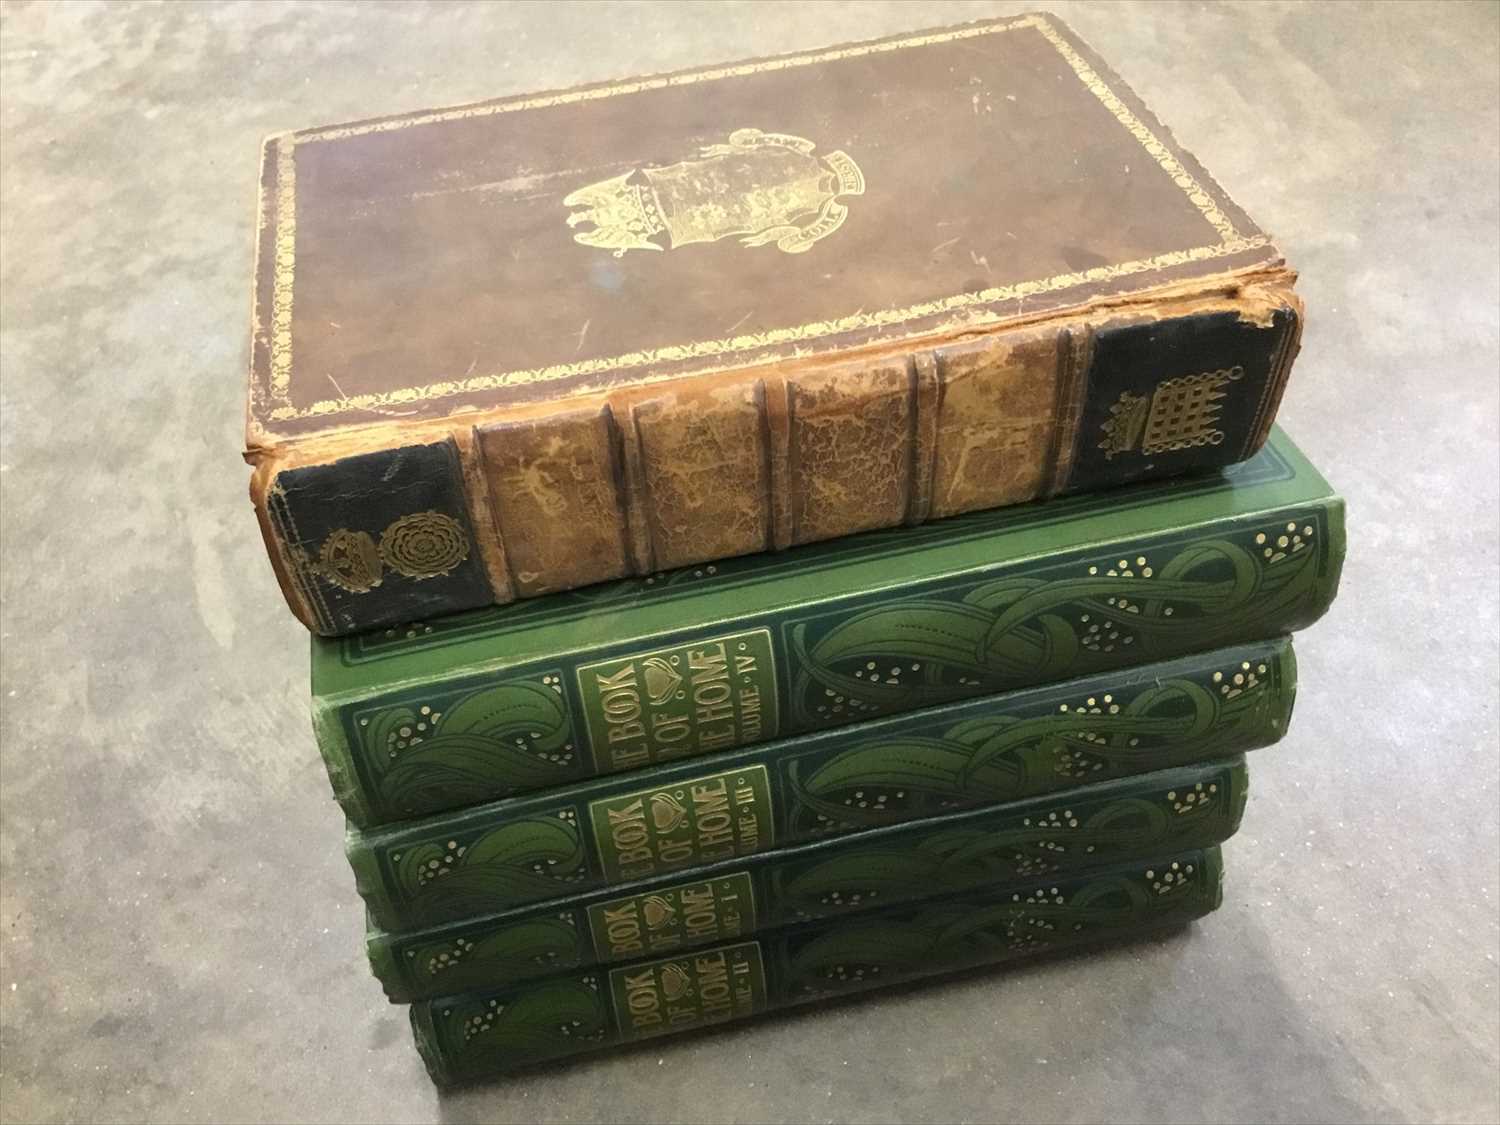 Lot 153 - The Book of the Home, four volumes, edited by H. C. Davison, published Gresham, cloth binding, together with Chr. Gotta. Haynes - P. Virgilii Maronis Opera, 1793, calf blinding with unusual Royal a...